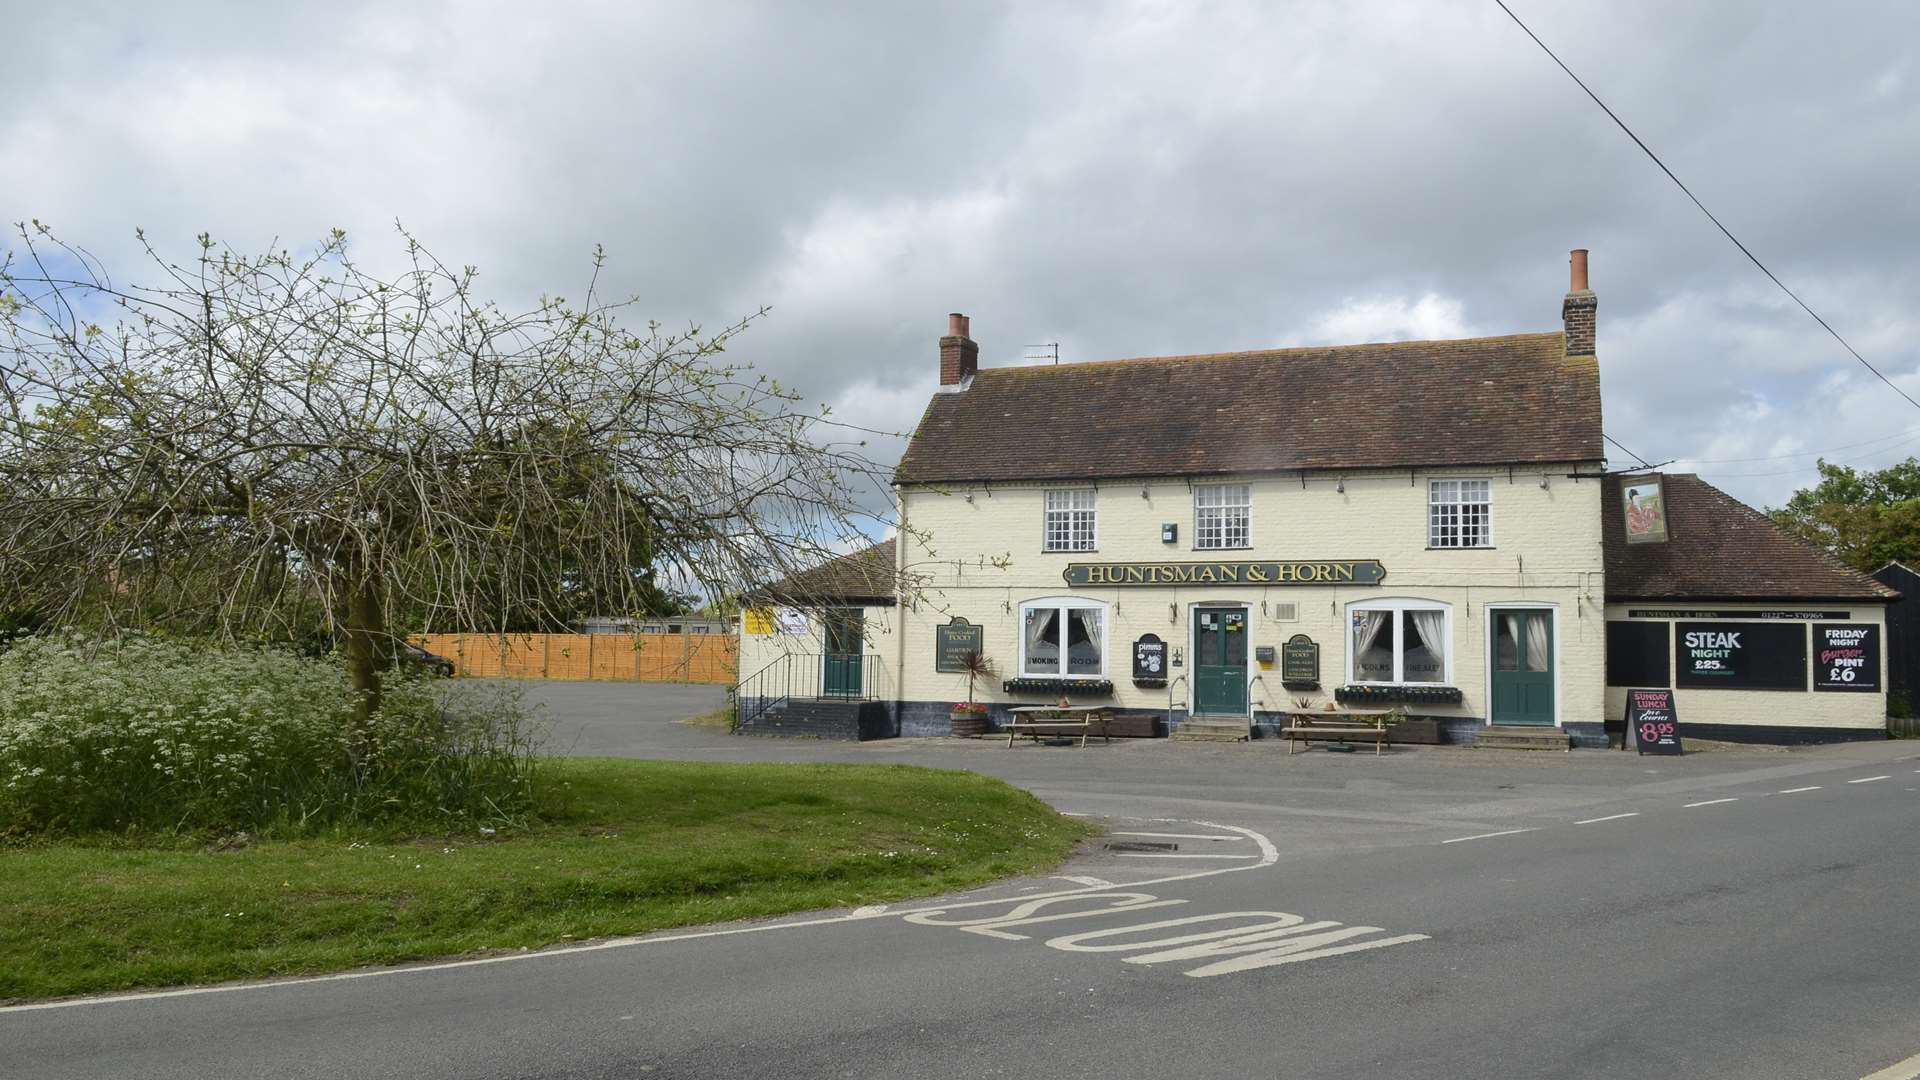 The Huntsman and Horn pub in Broomfield